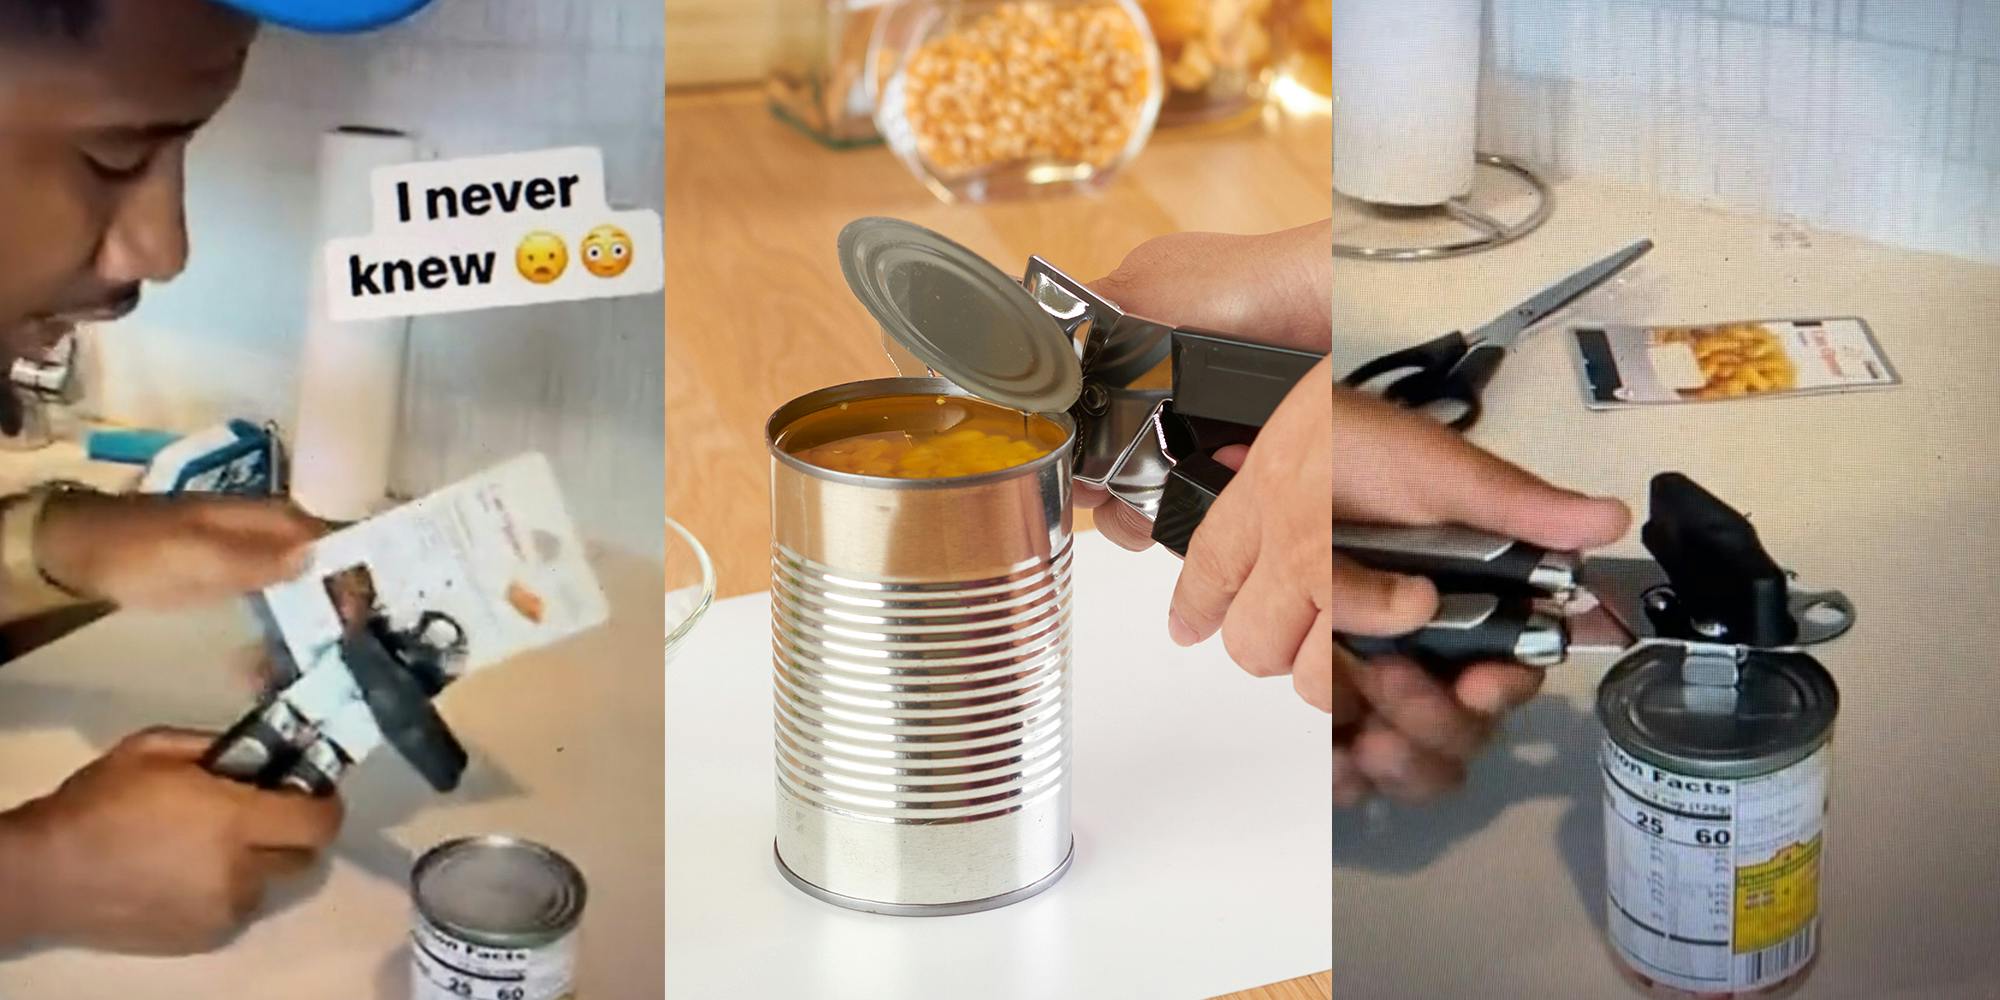 People are just now finding out the right way to use a can opener